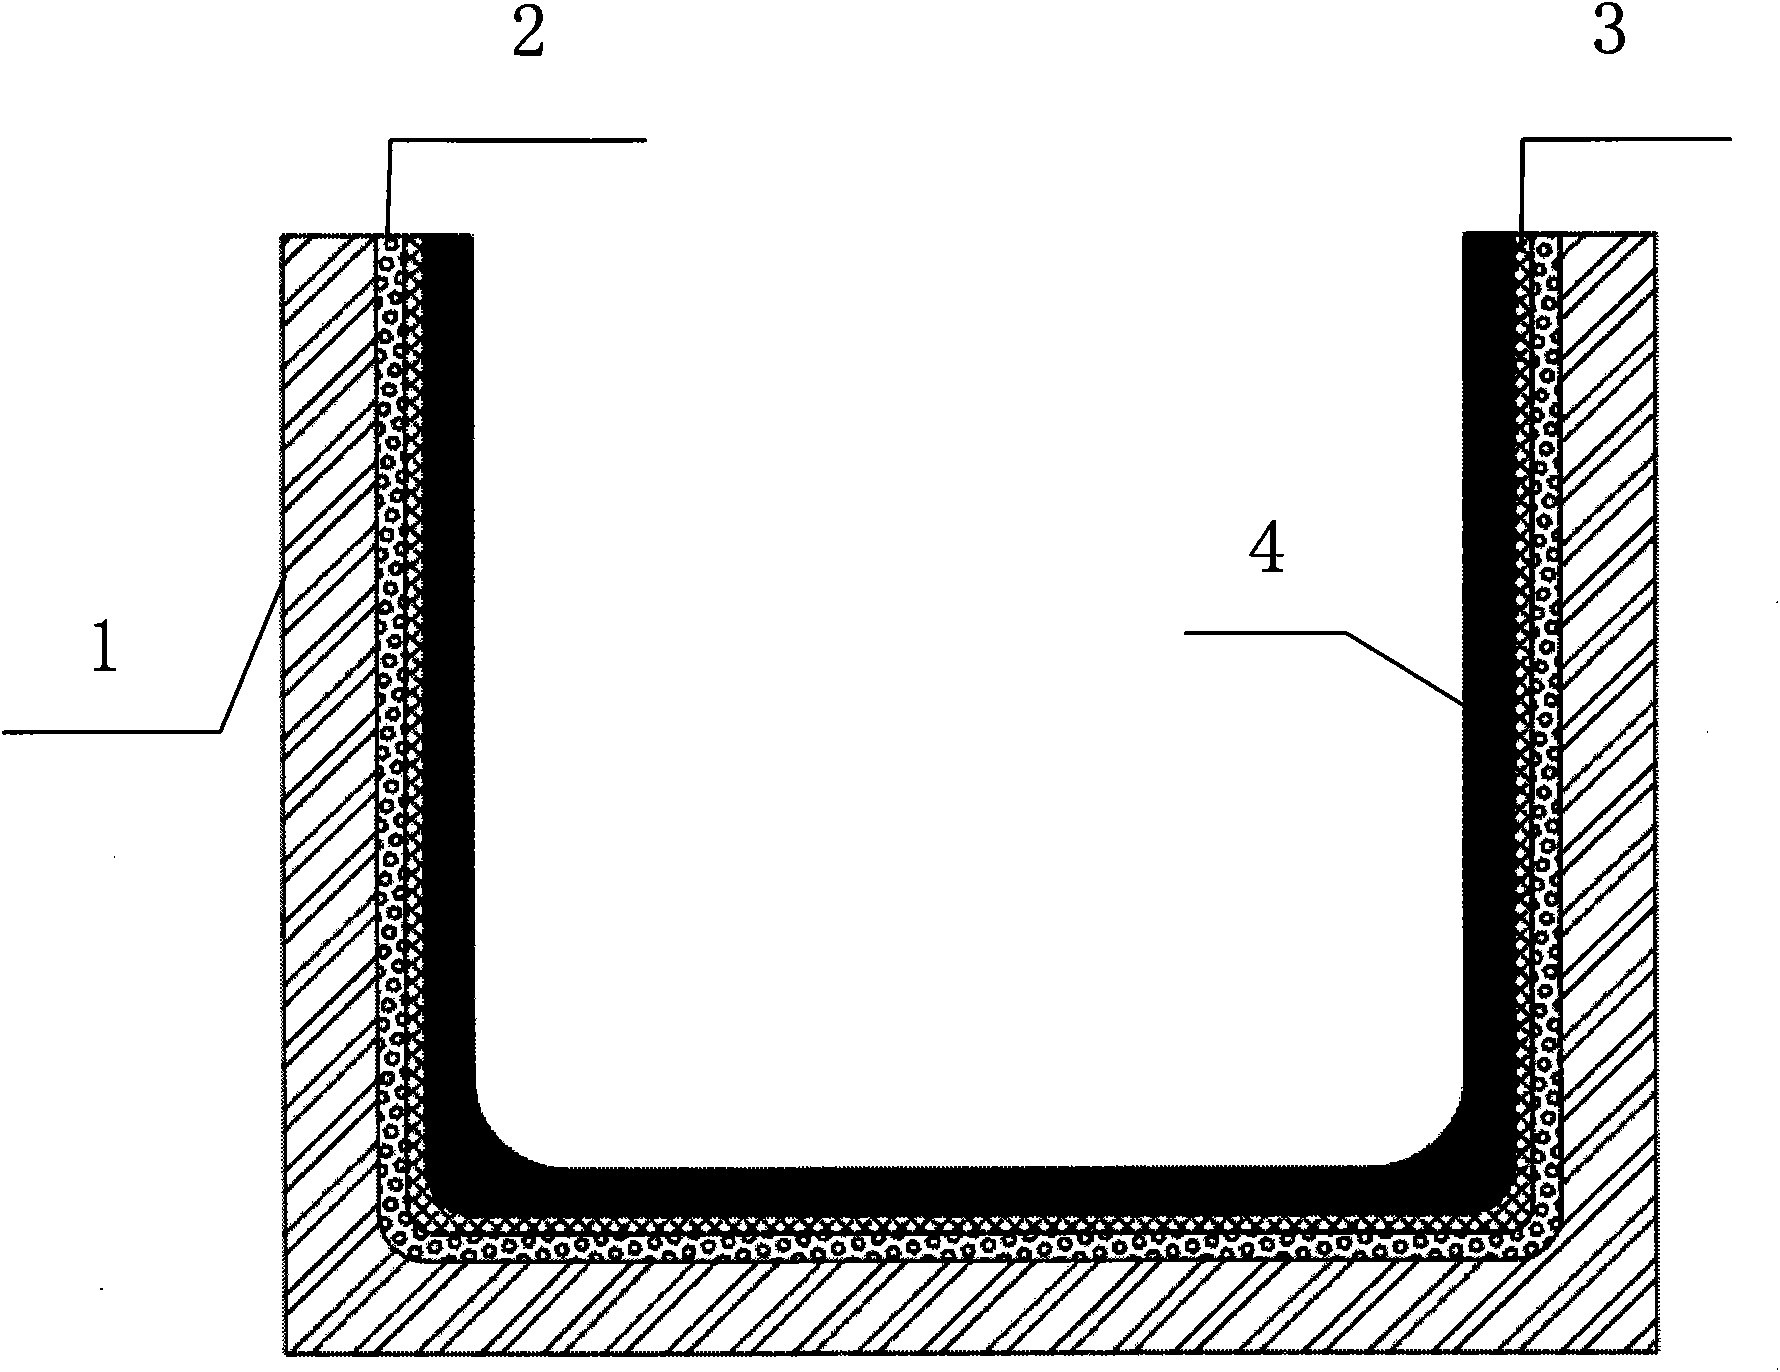 Quartz crucible with composite coating layers for preparing polycrystalline silicon ingot